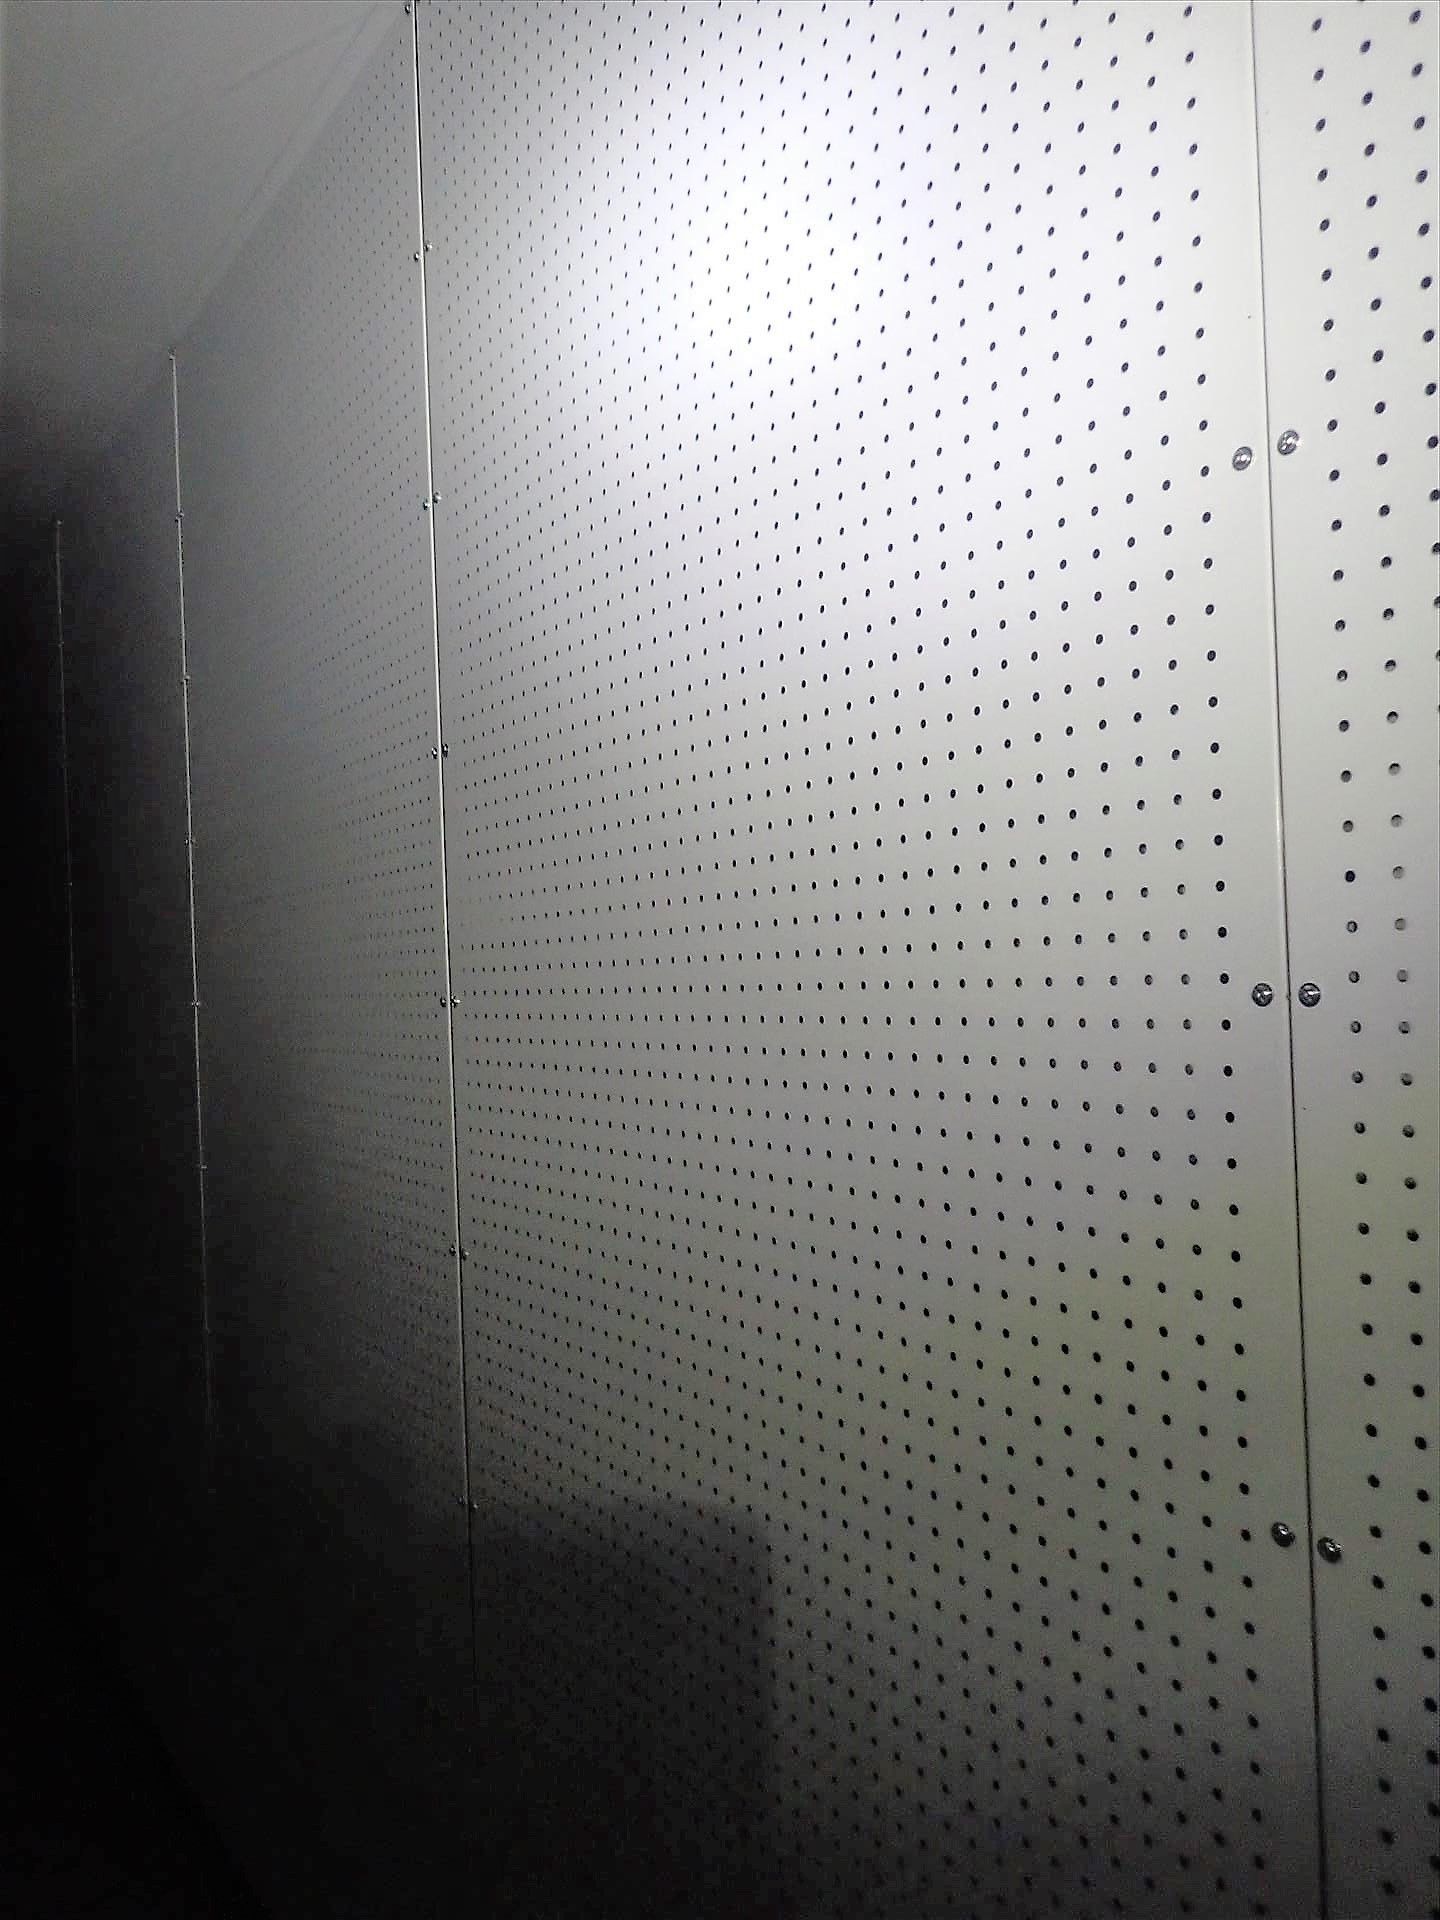 Conviron drying room, 50 ft. x 12 ft., ducting, perforated wall panels w/ Argus control panel, - Image 5 of 5